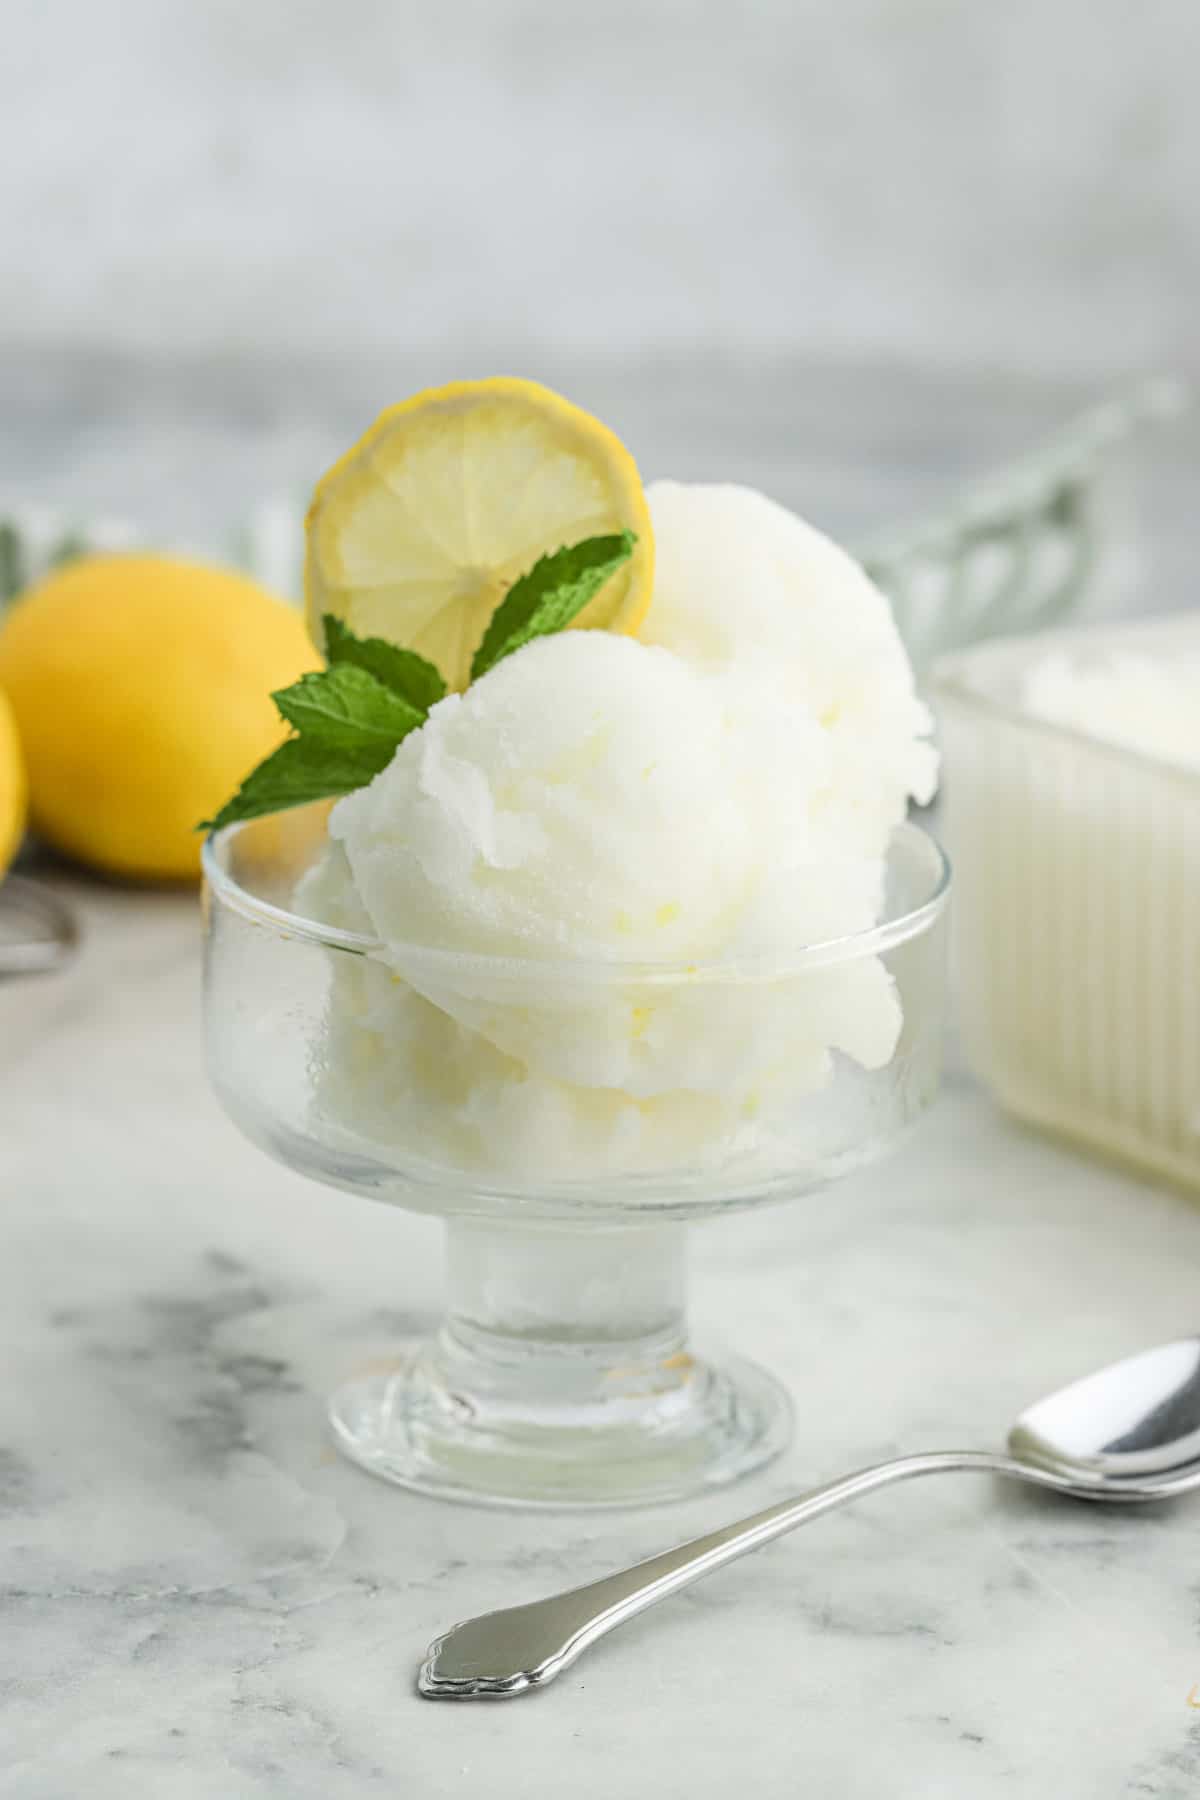 A glass dish of lemonade sorbet on the table with a piece of lemon slice and fresh mint for garnish.